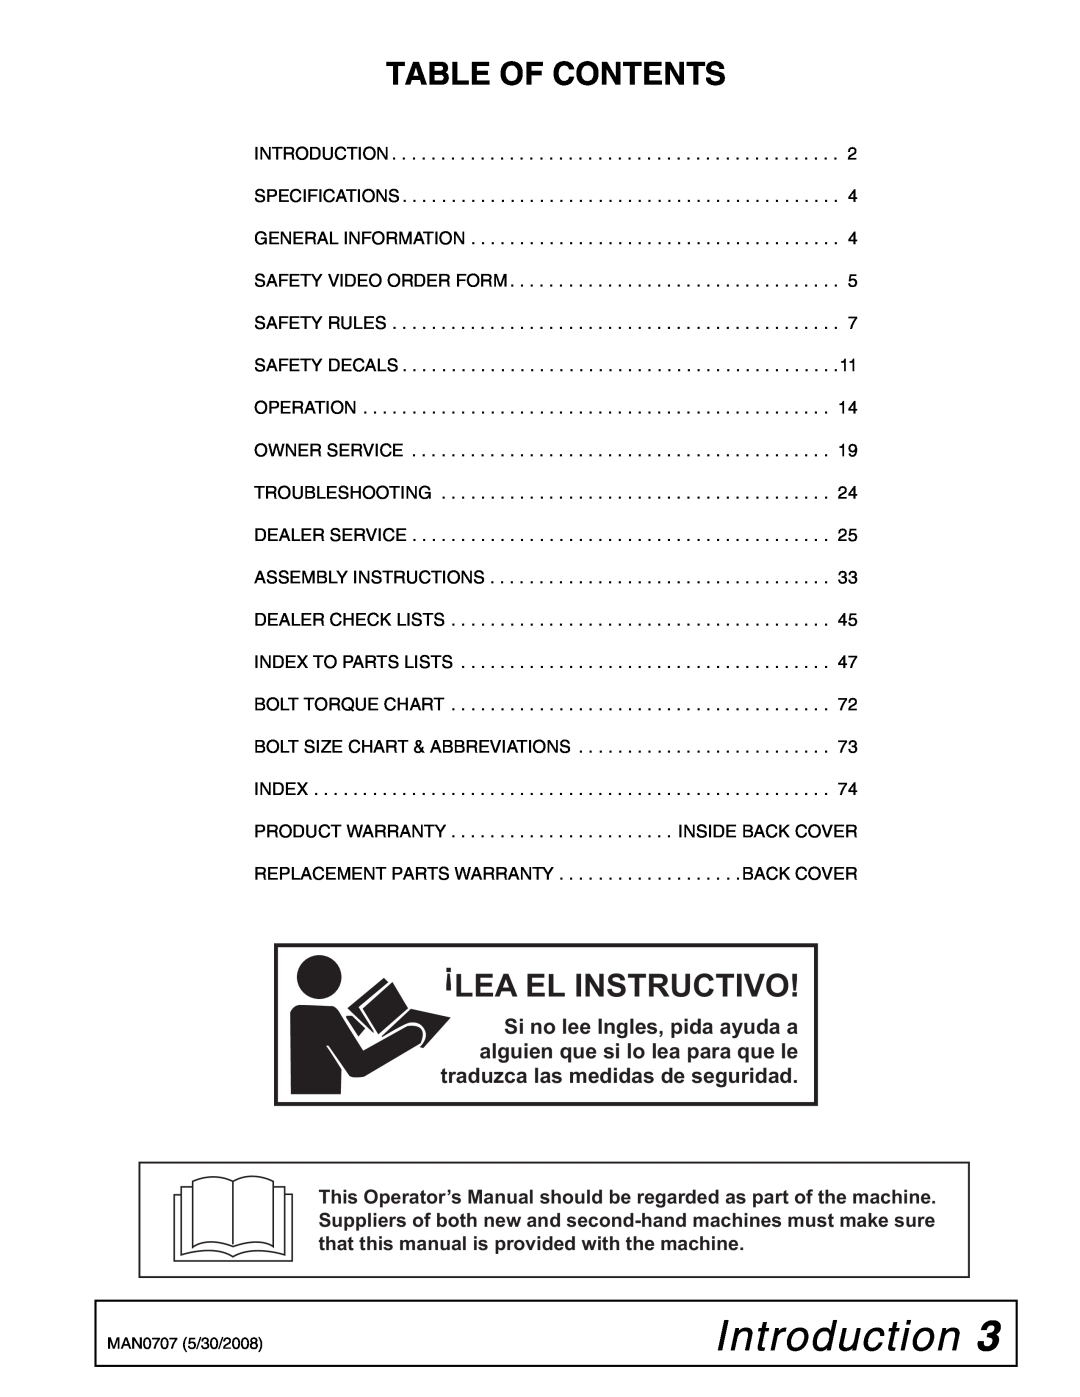 Woods Equipment BW180-3, BW180Q-3, BW126-3, BW126Q-3 manual Introduction, Table Of Contents, Lea El Instructivo 